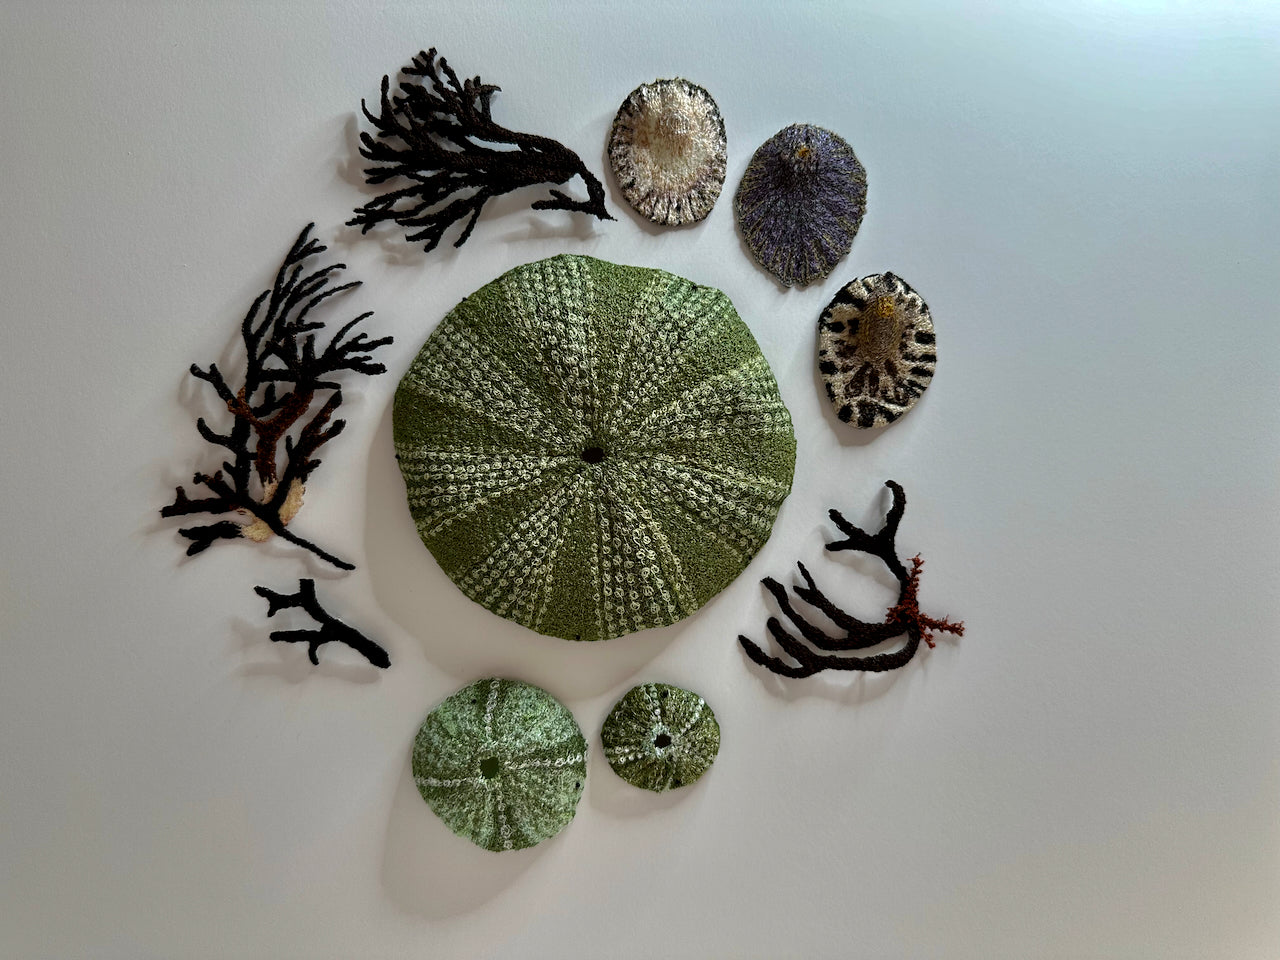 Kina, limpets and seaweed sculptural embroidery